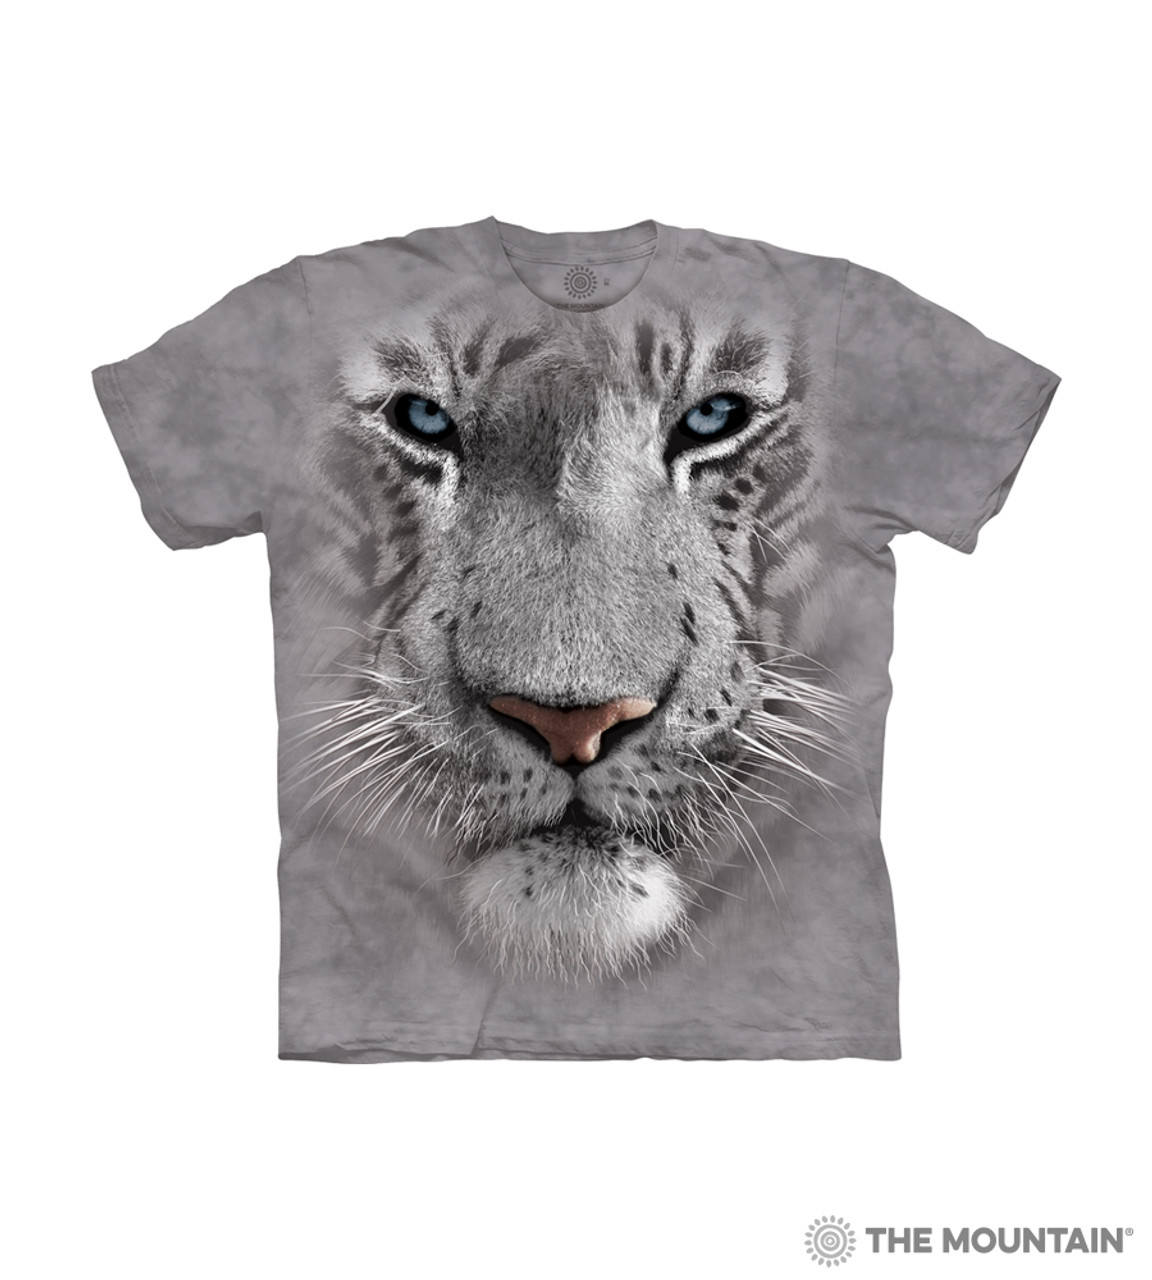 Jungle Zoo Childrens Sizes NEW Tiger Face Kids T-Shirt from The Mountain 